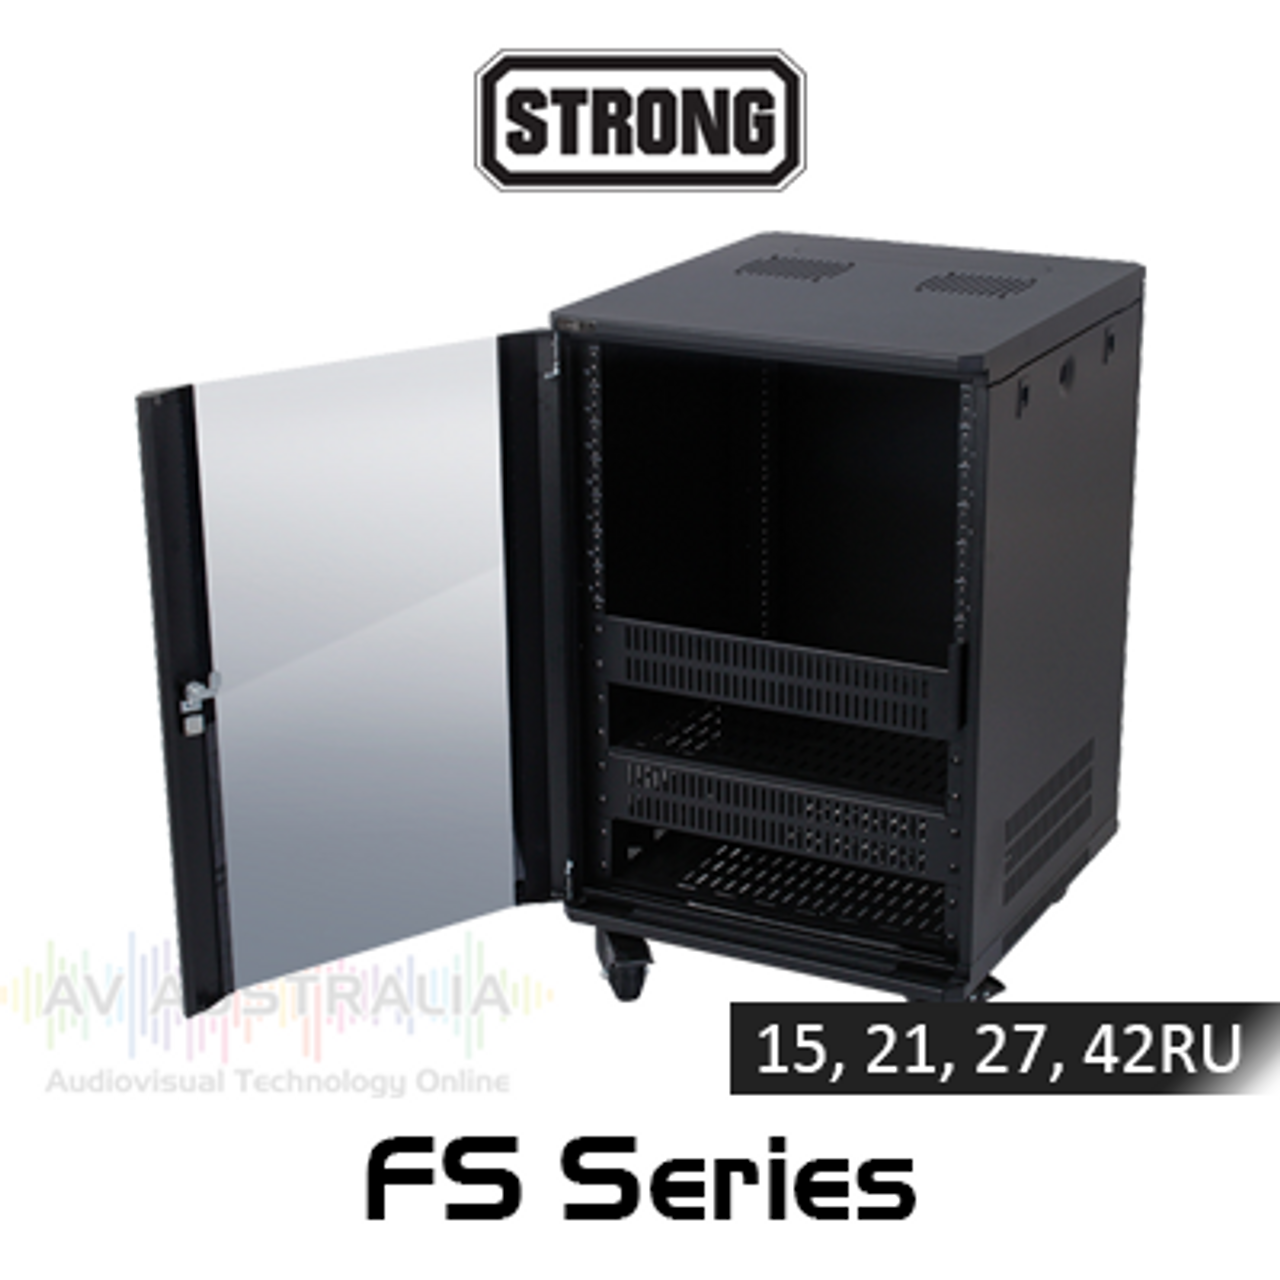 Strong FS Series 24" Depth Rack System with DC Fans (15, 21, 27, 42RU)